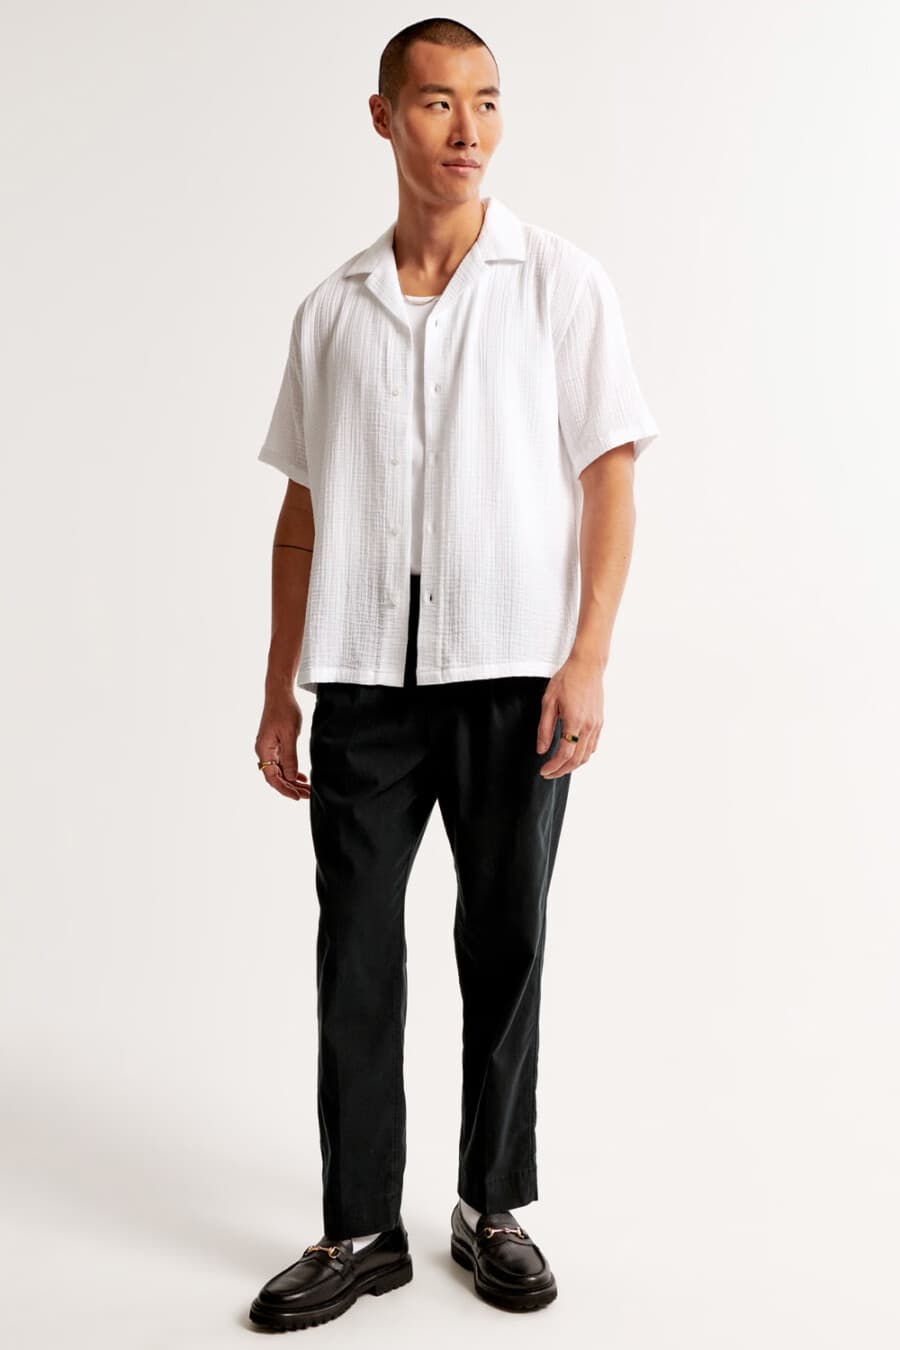 Men's black cropped pants, white tank top, white Camp collar shirt, white socks and black horsebit leather loafers outfit